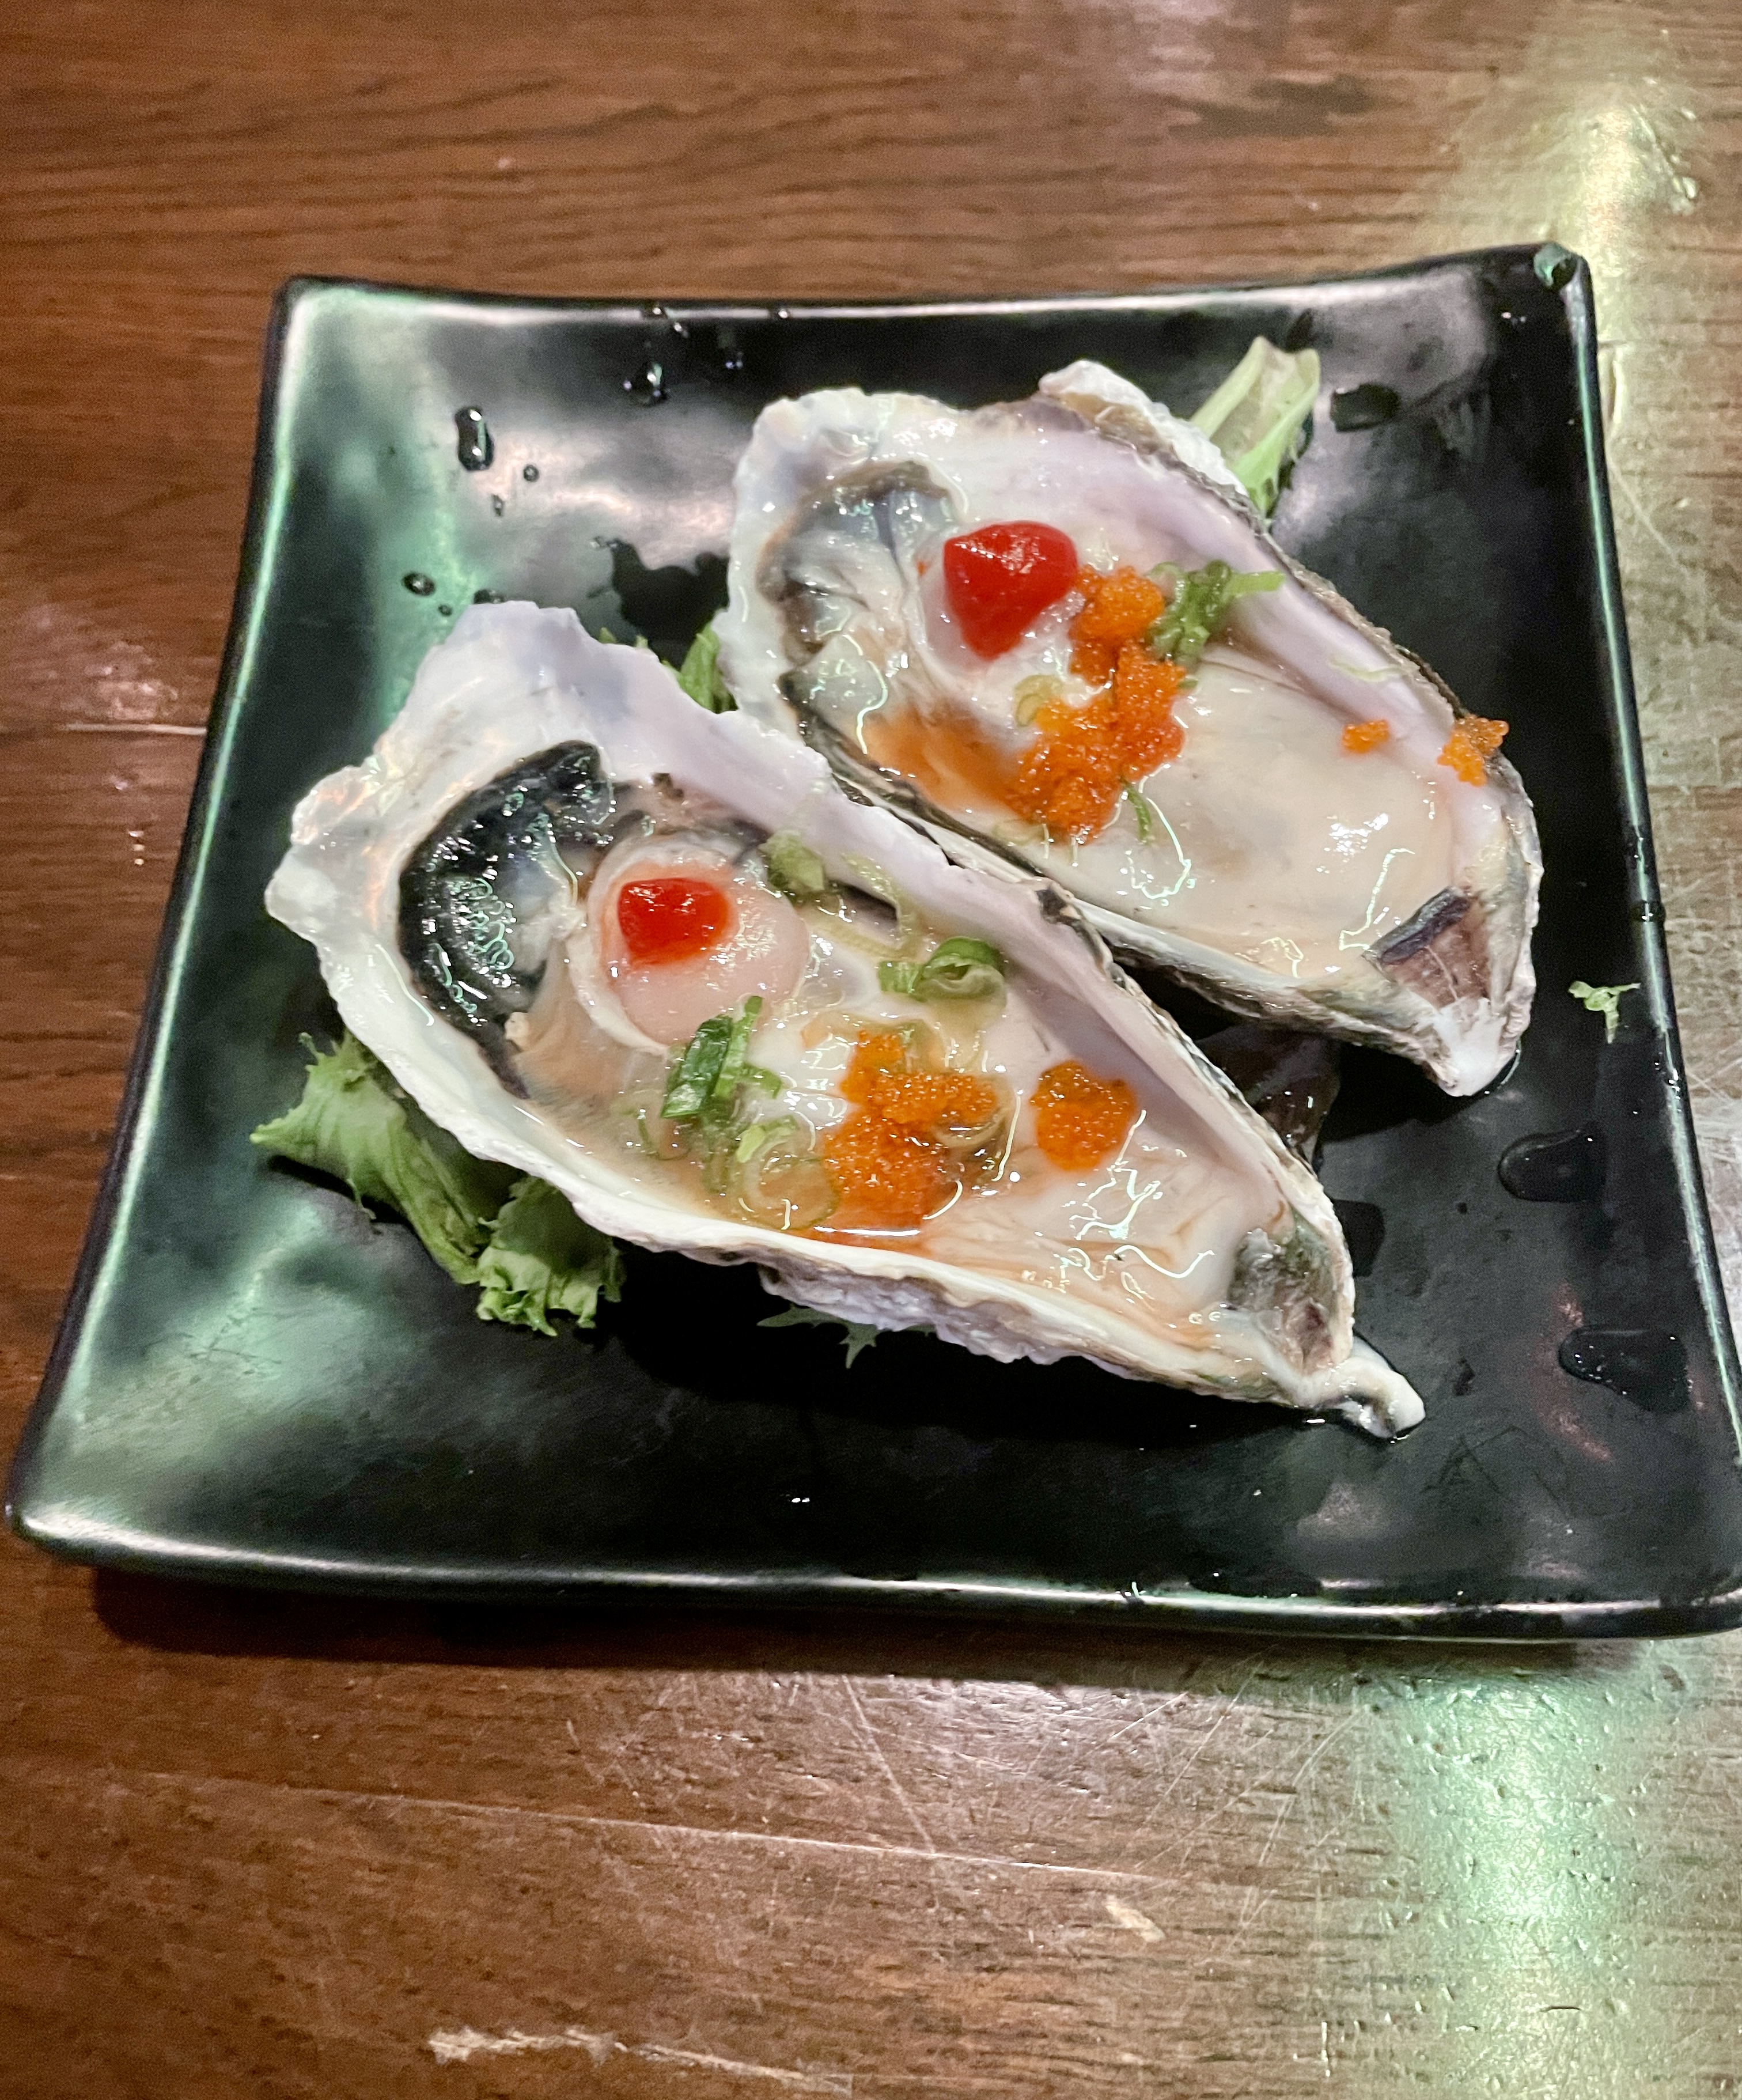 Two fresh oysters in the shell on a black plate on a brown table